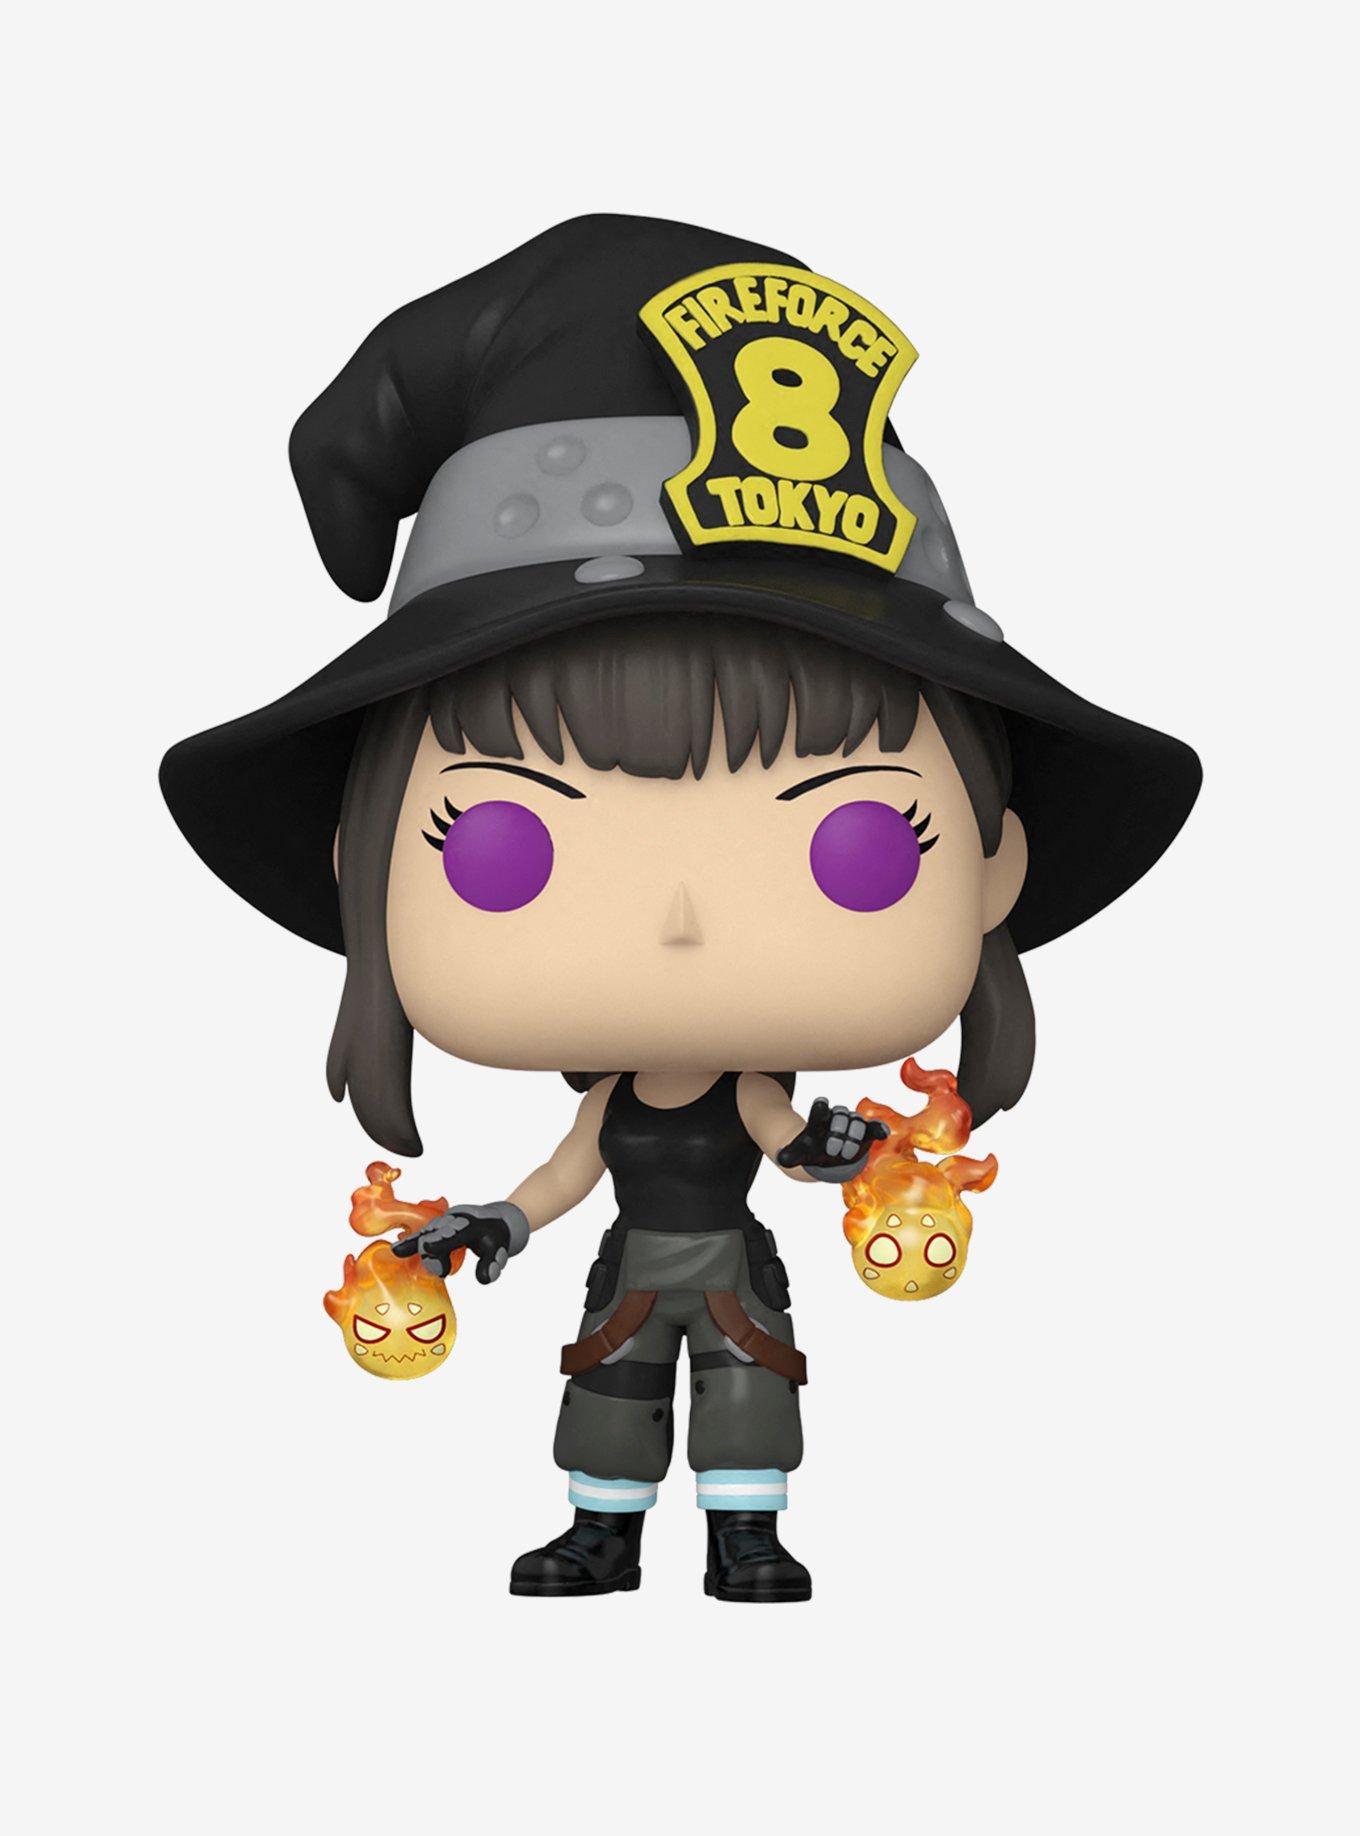 Funko Turns Up the Heat With Their New Fire Force Pop Vinyls